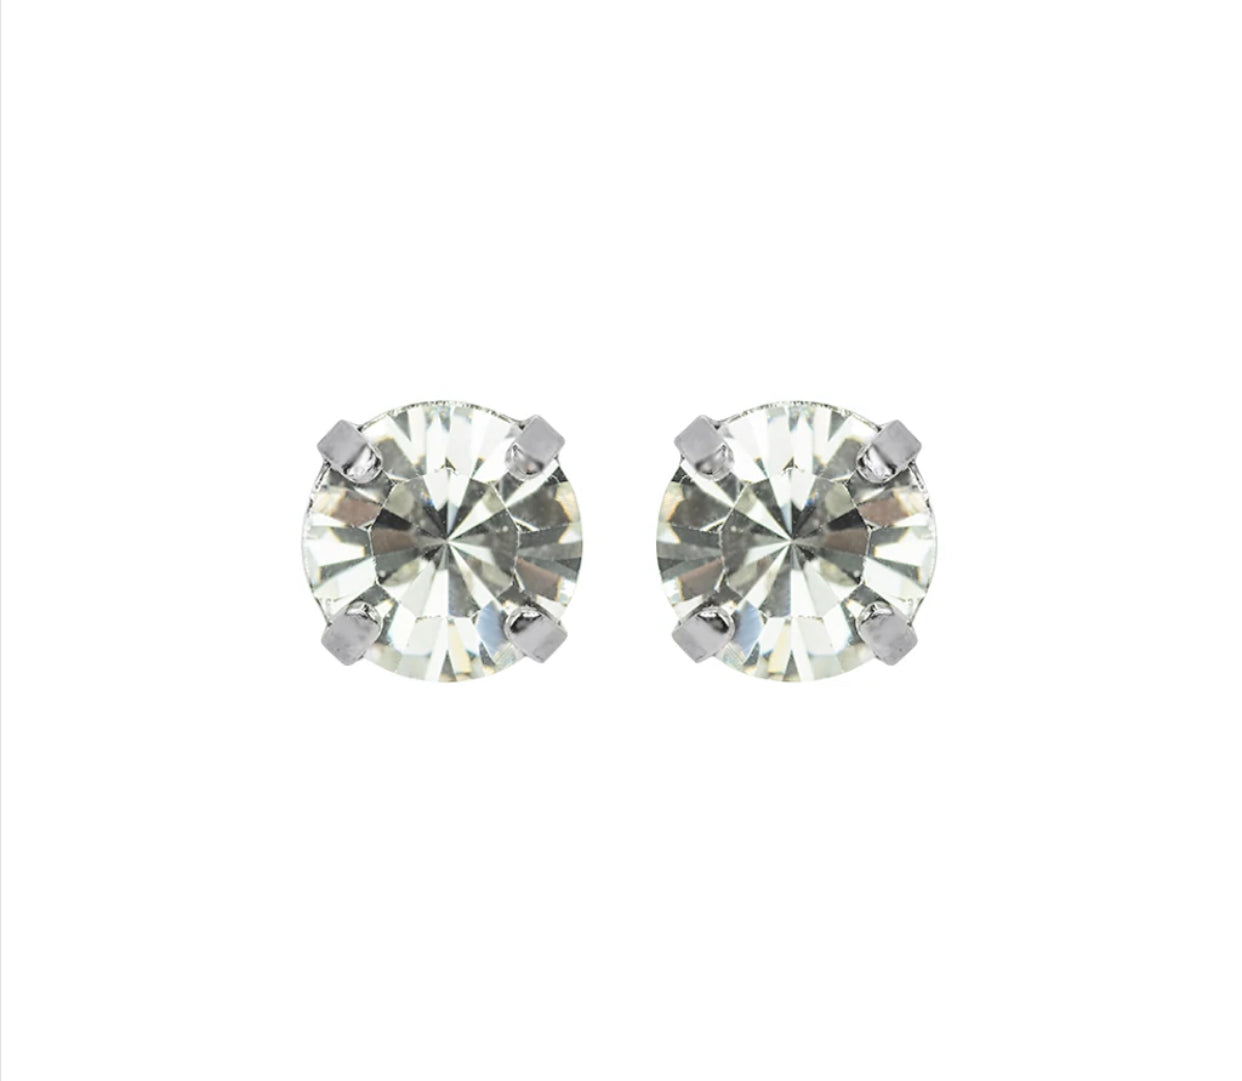 Mariana Antiqued Silver Crystal Post Earrings in “On a Clear Day”